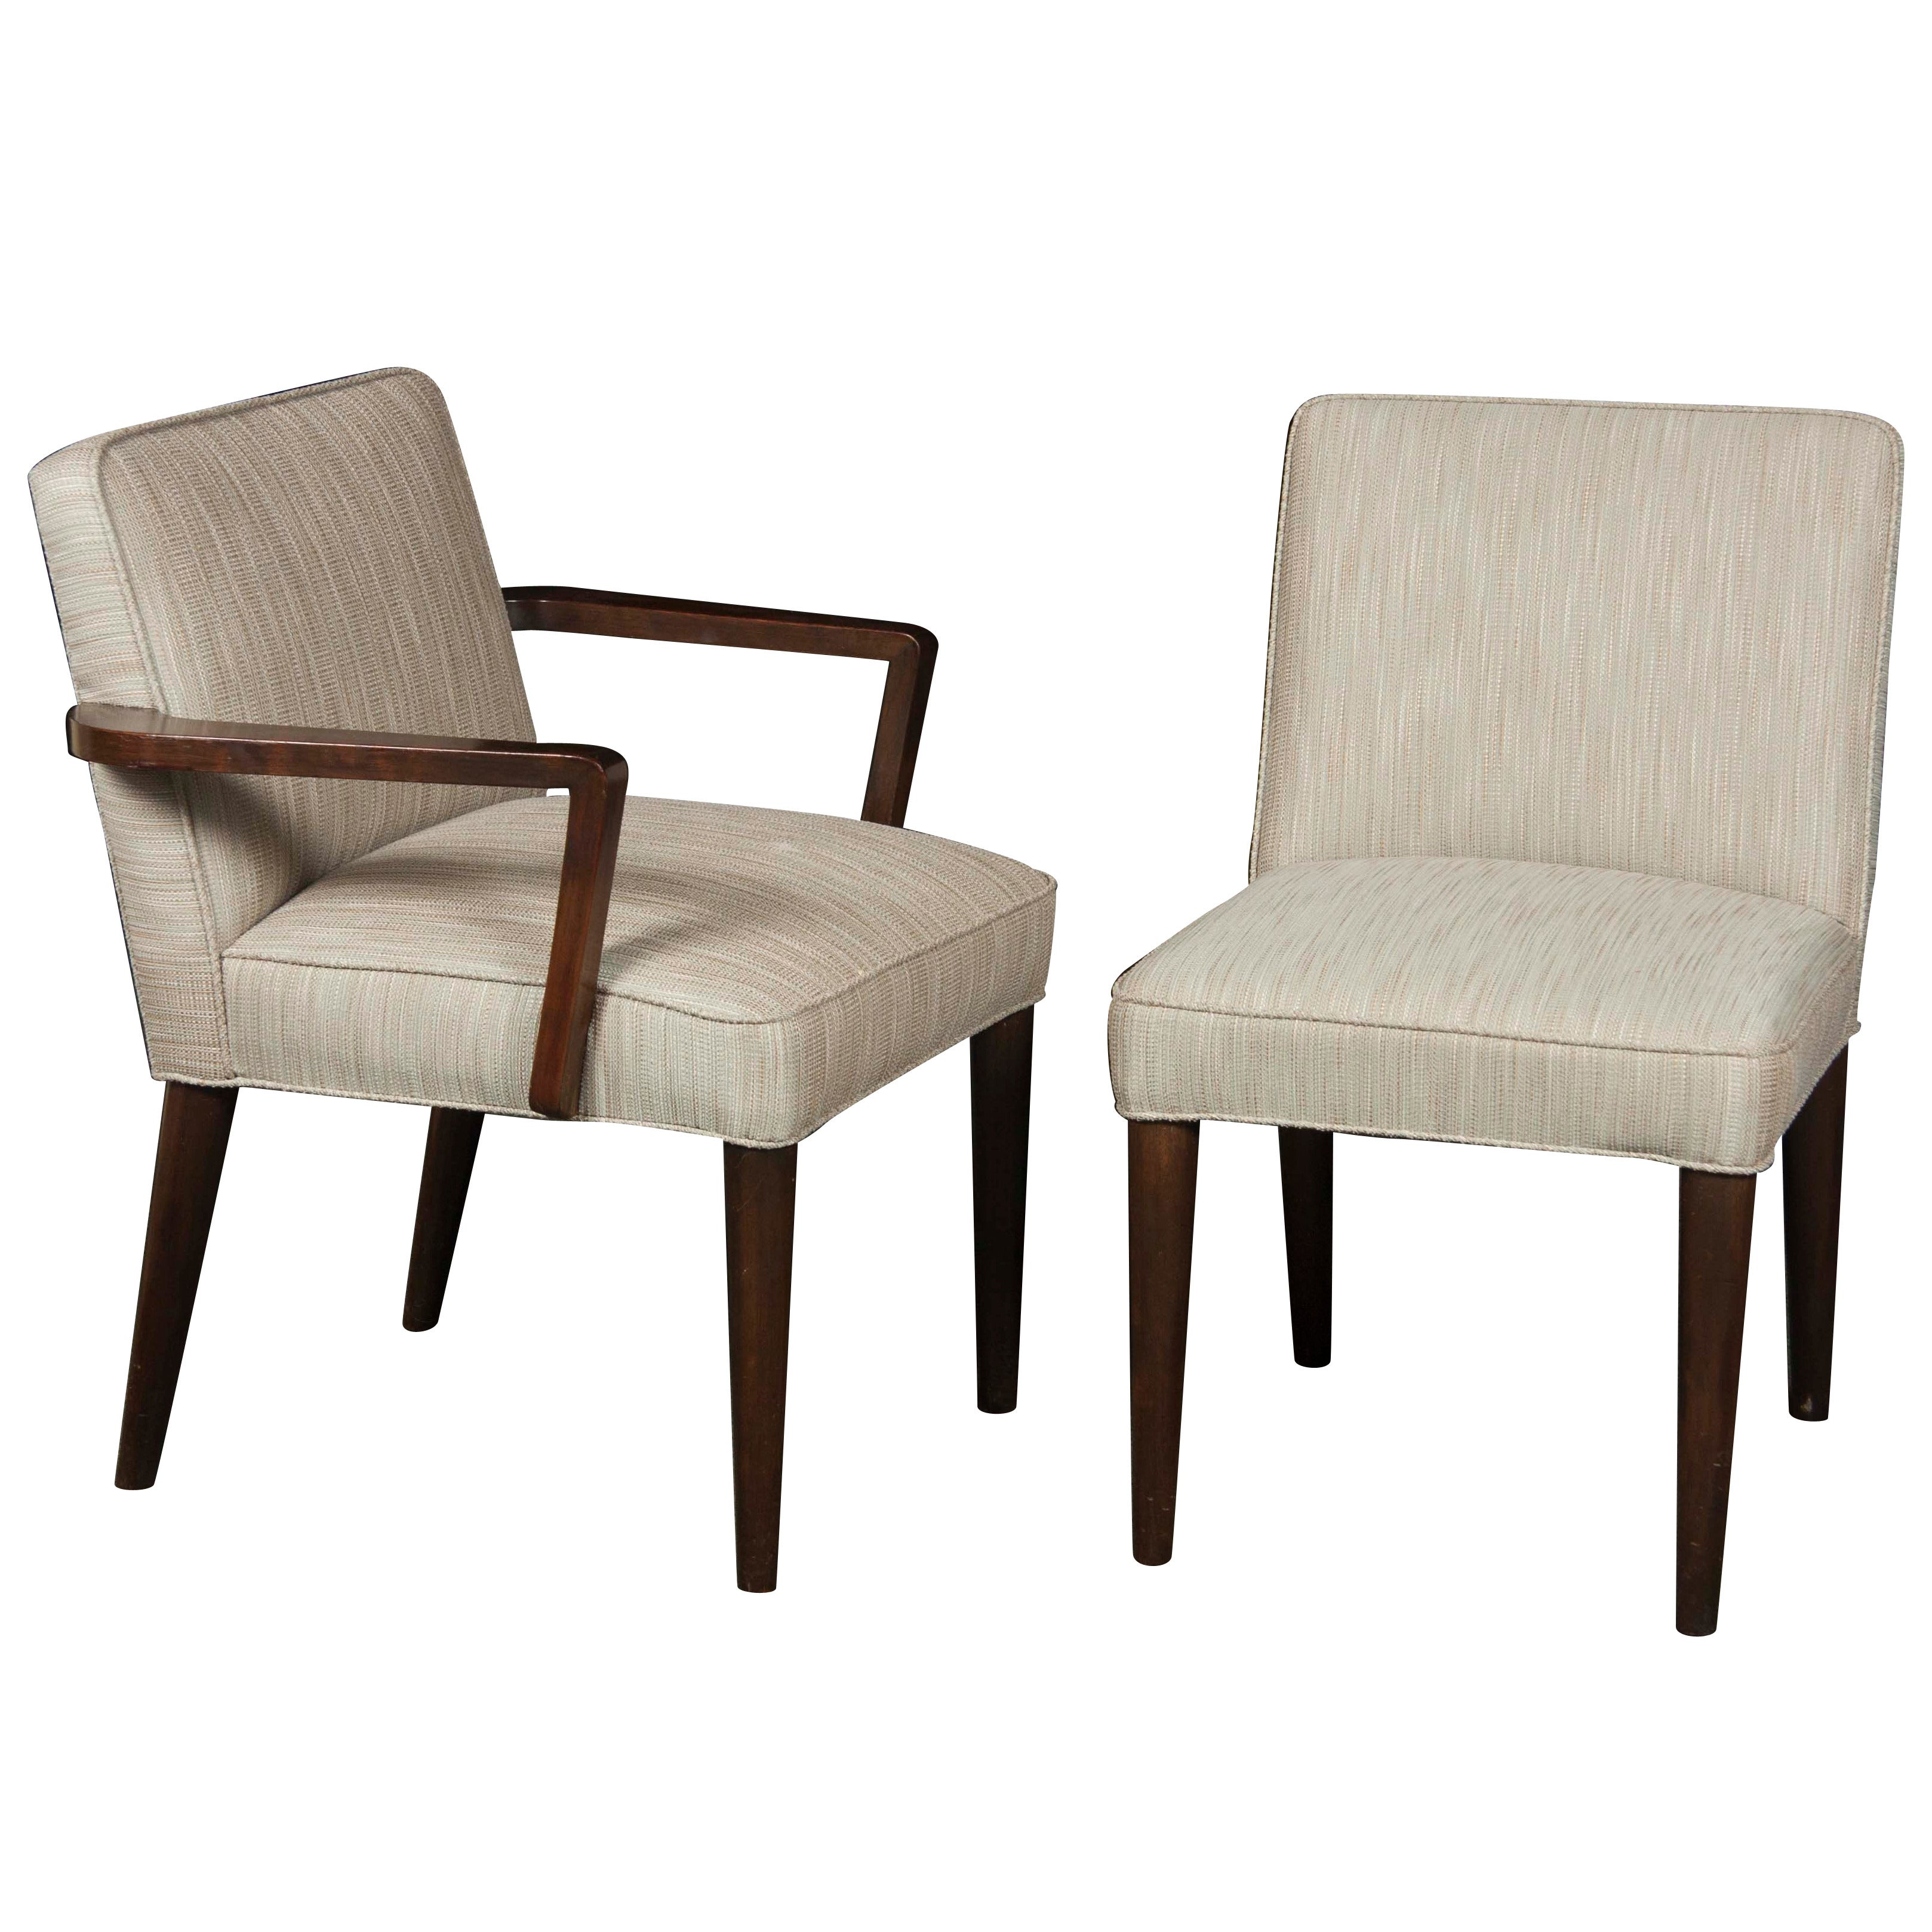 Set of 12 Upholsted Back Mid-Century Modern Dining Chairs